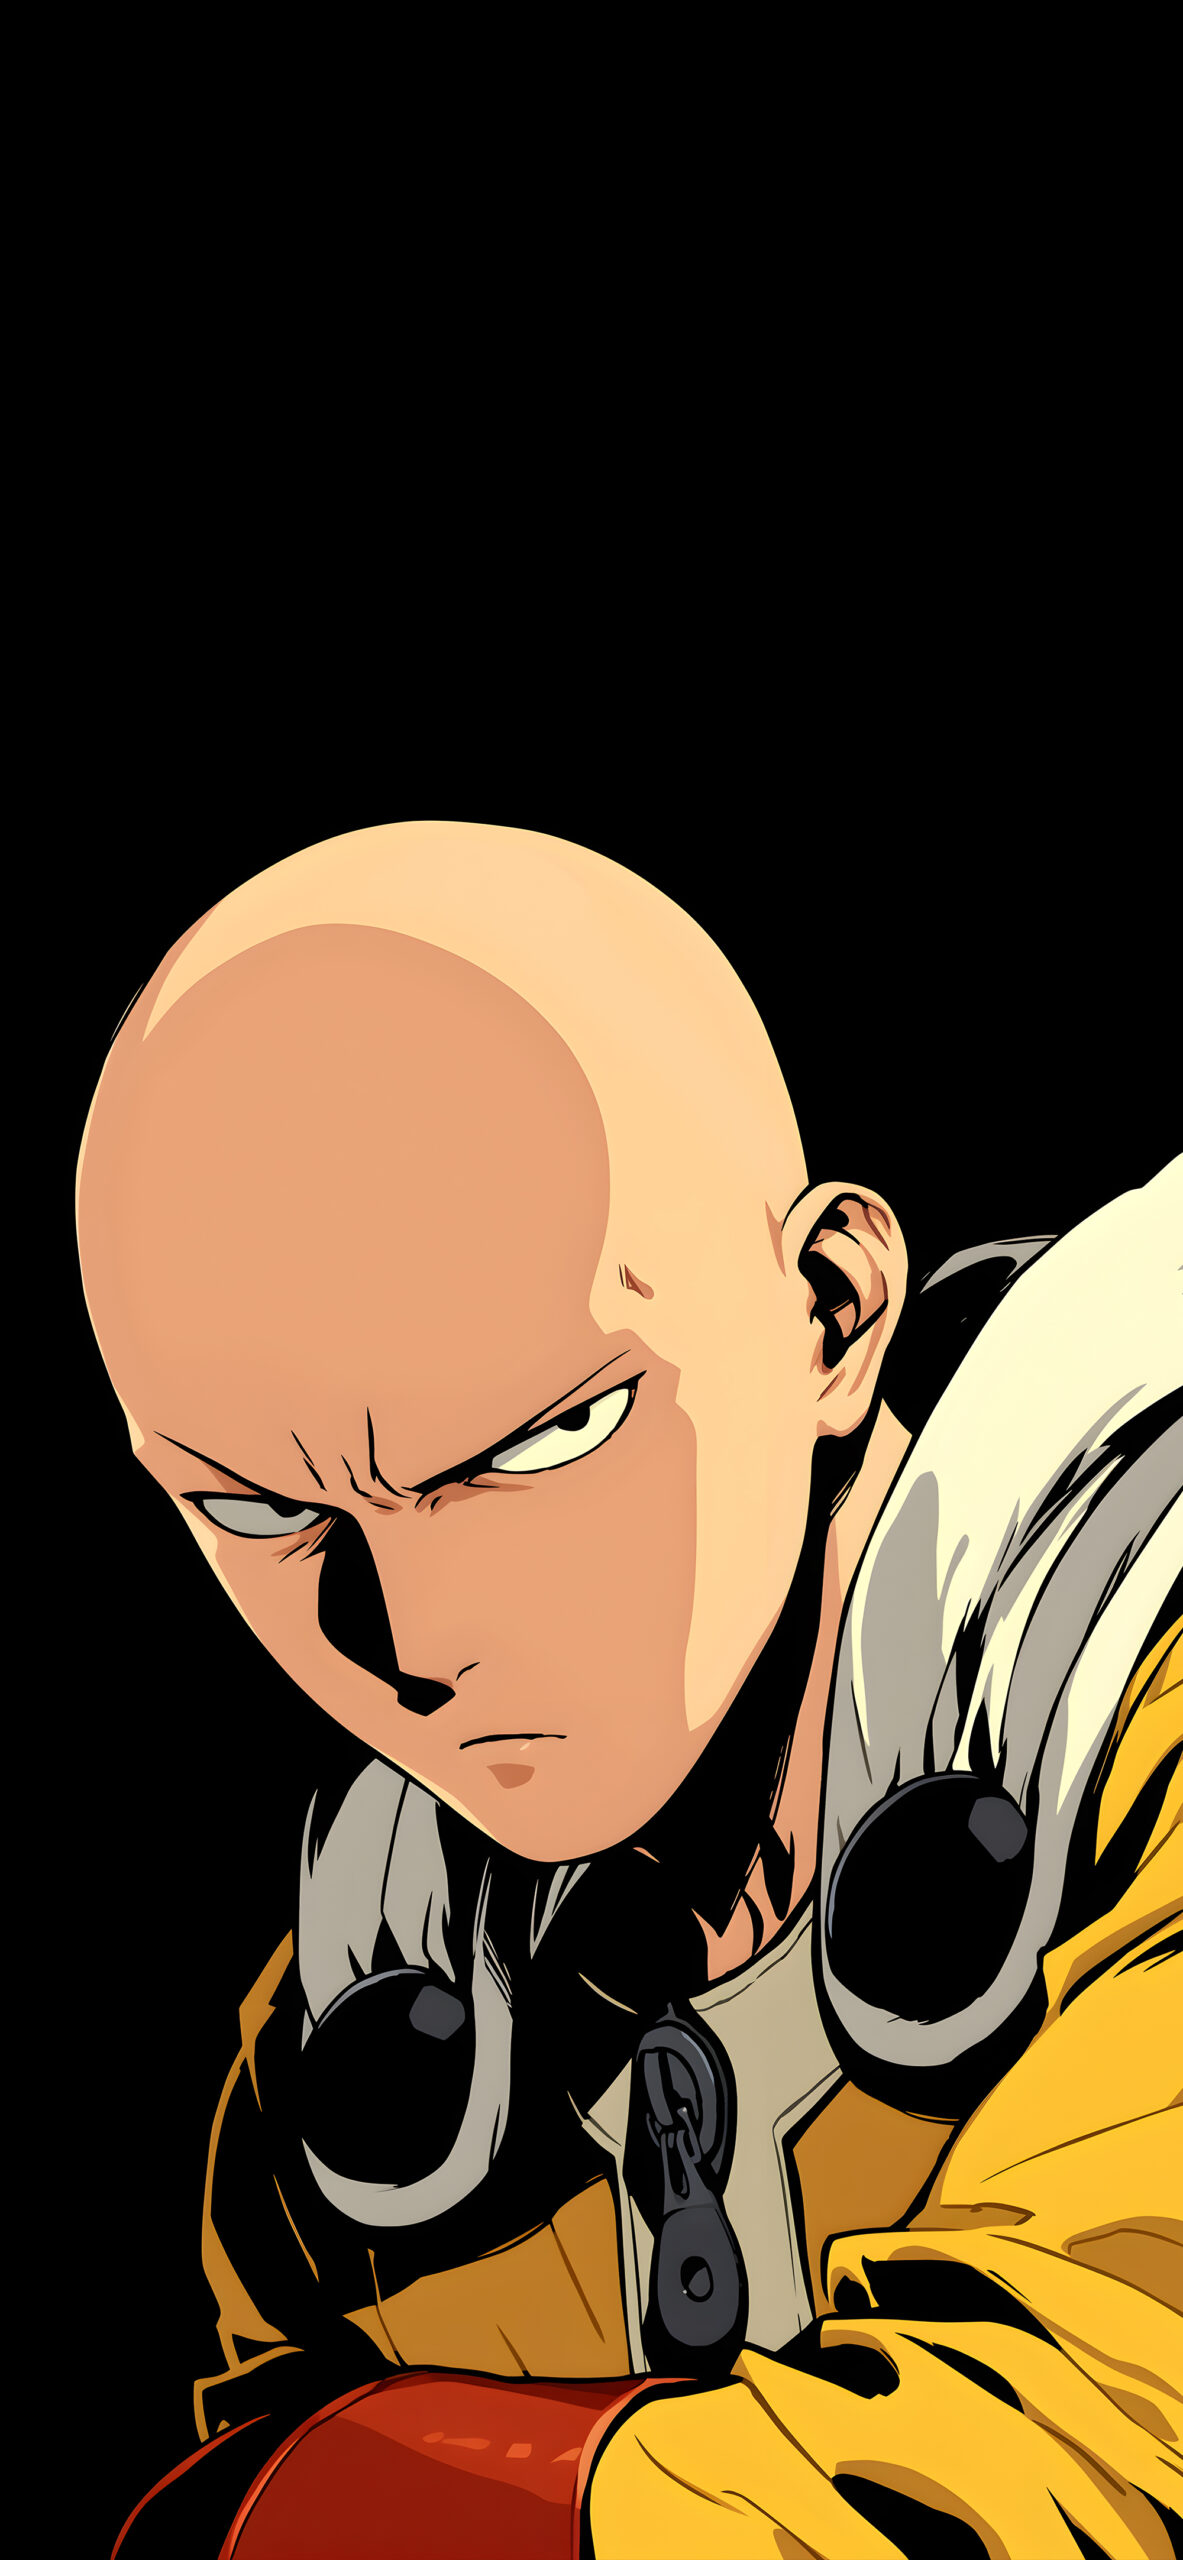 Saitama One-Punch Man Anime Wallpaper for iPhone & Android